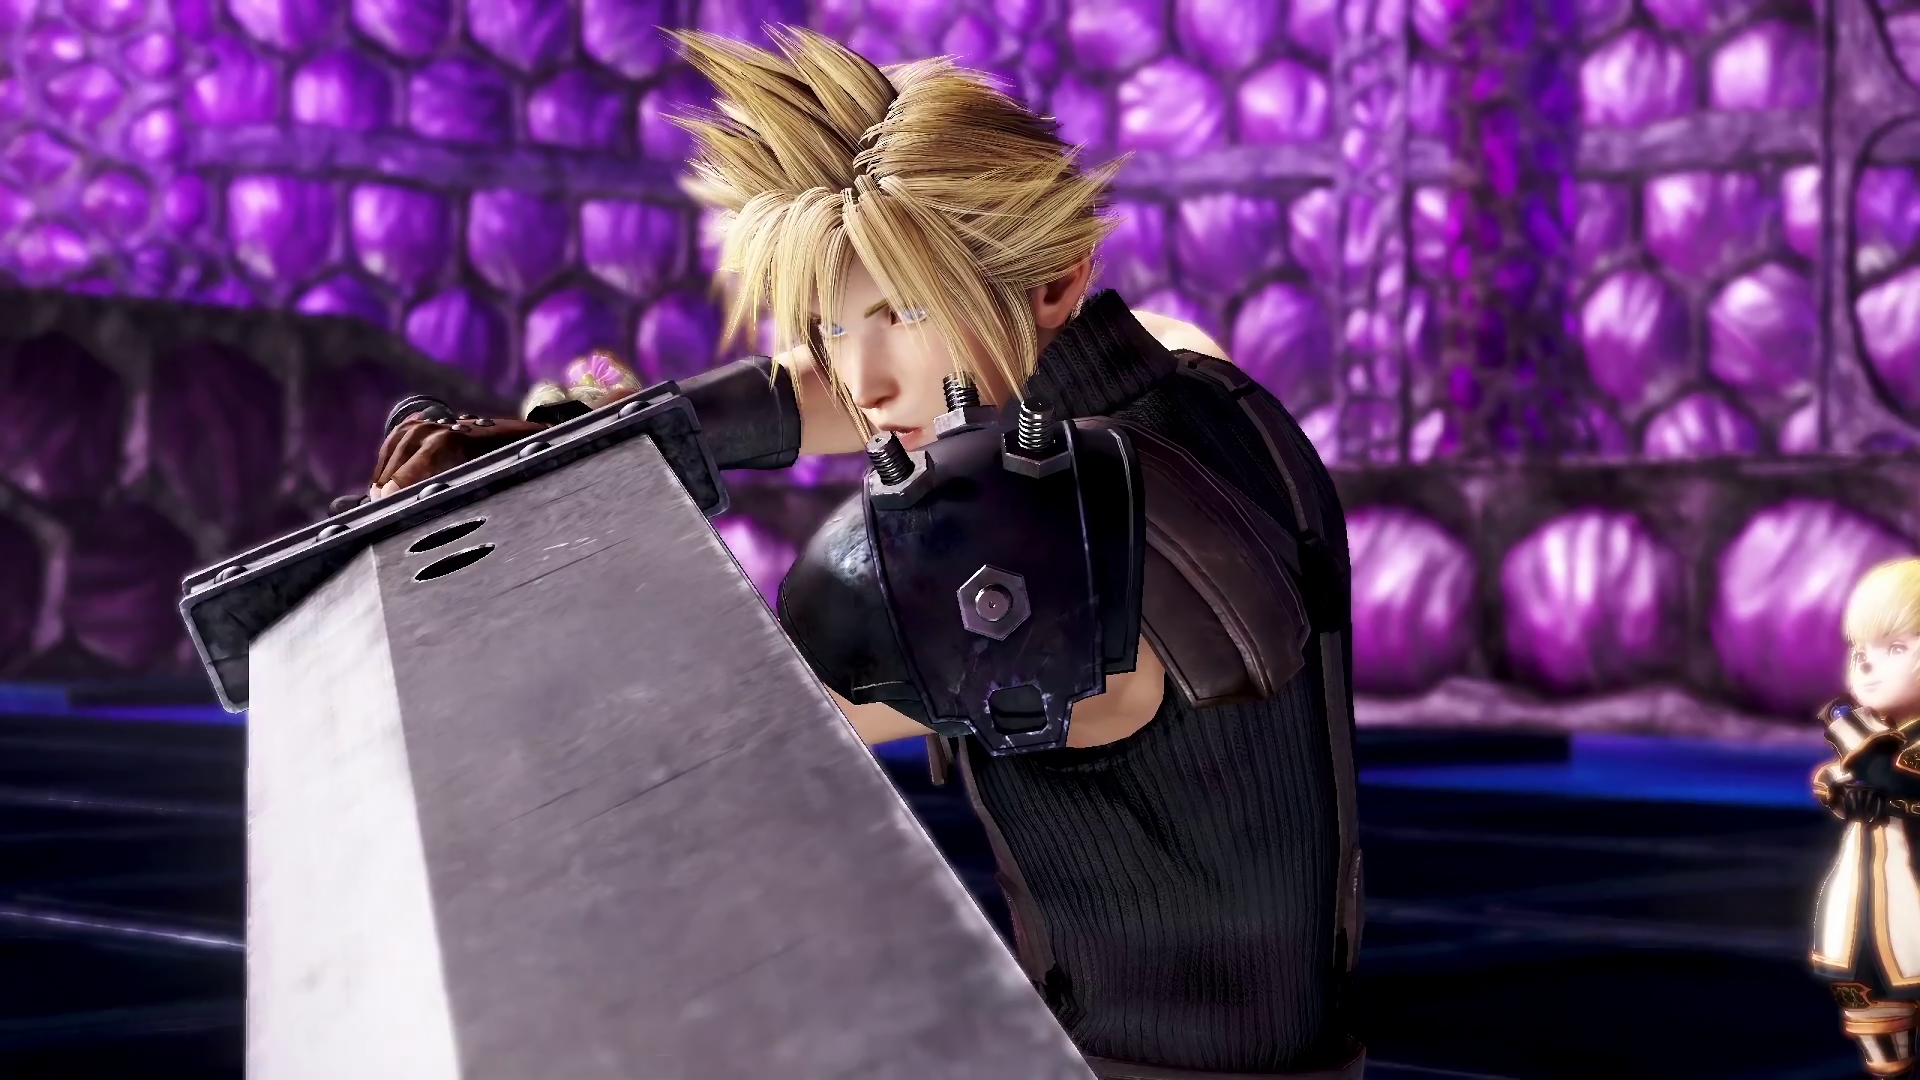 Cloud Strife Dissidia Final Fantasy Nt Video Game Thumbnail - Cloud Strife Dissidia Nt , HD Wallpaper & Backgrounds